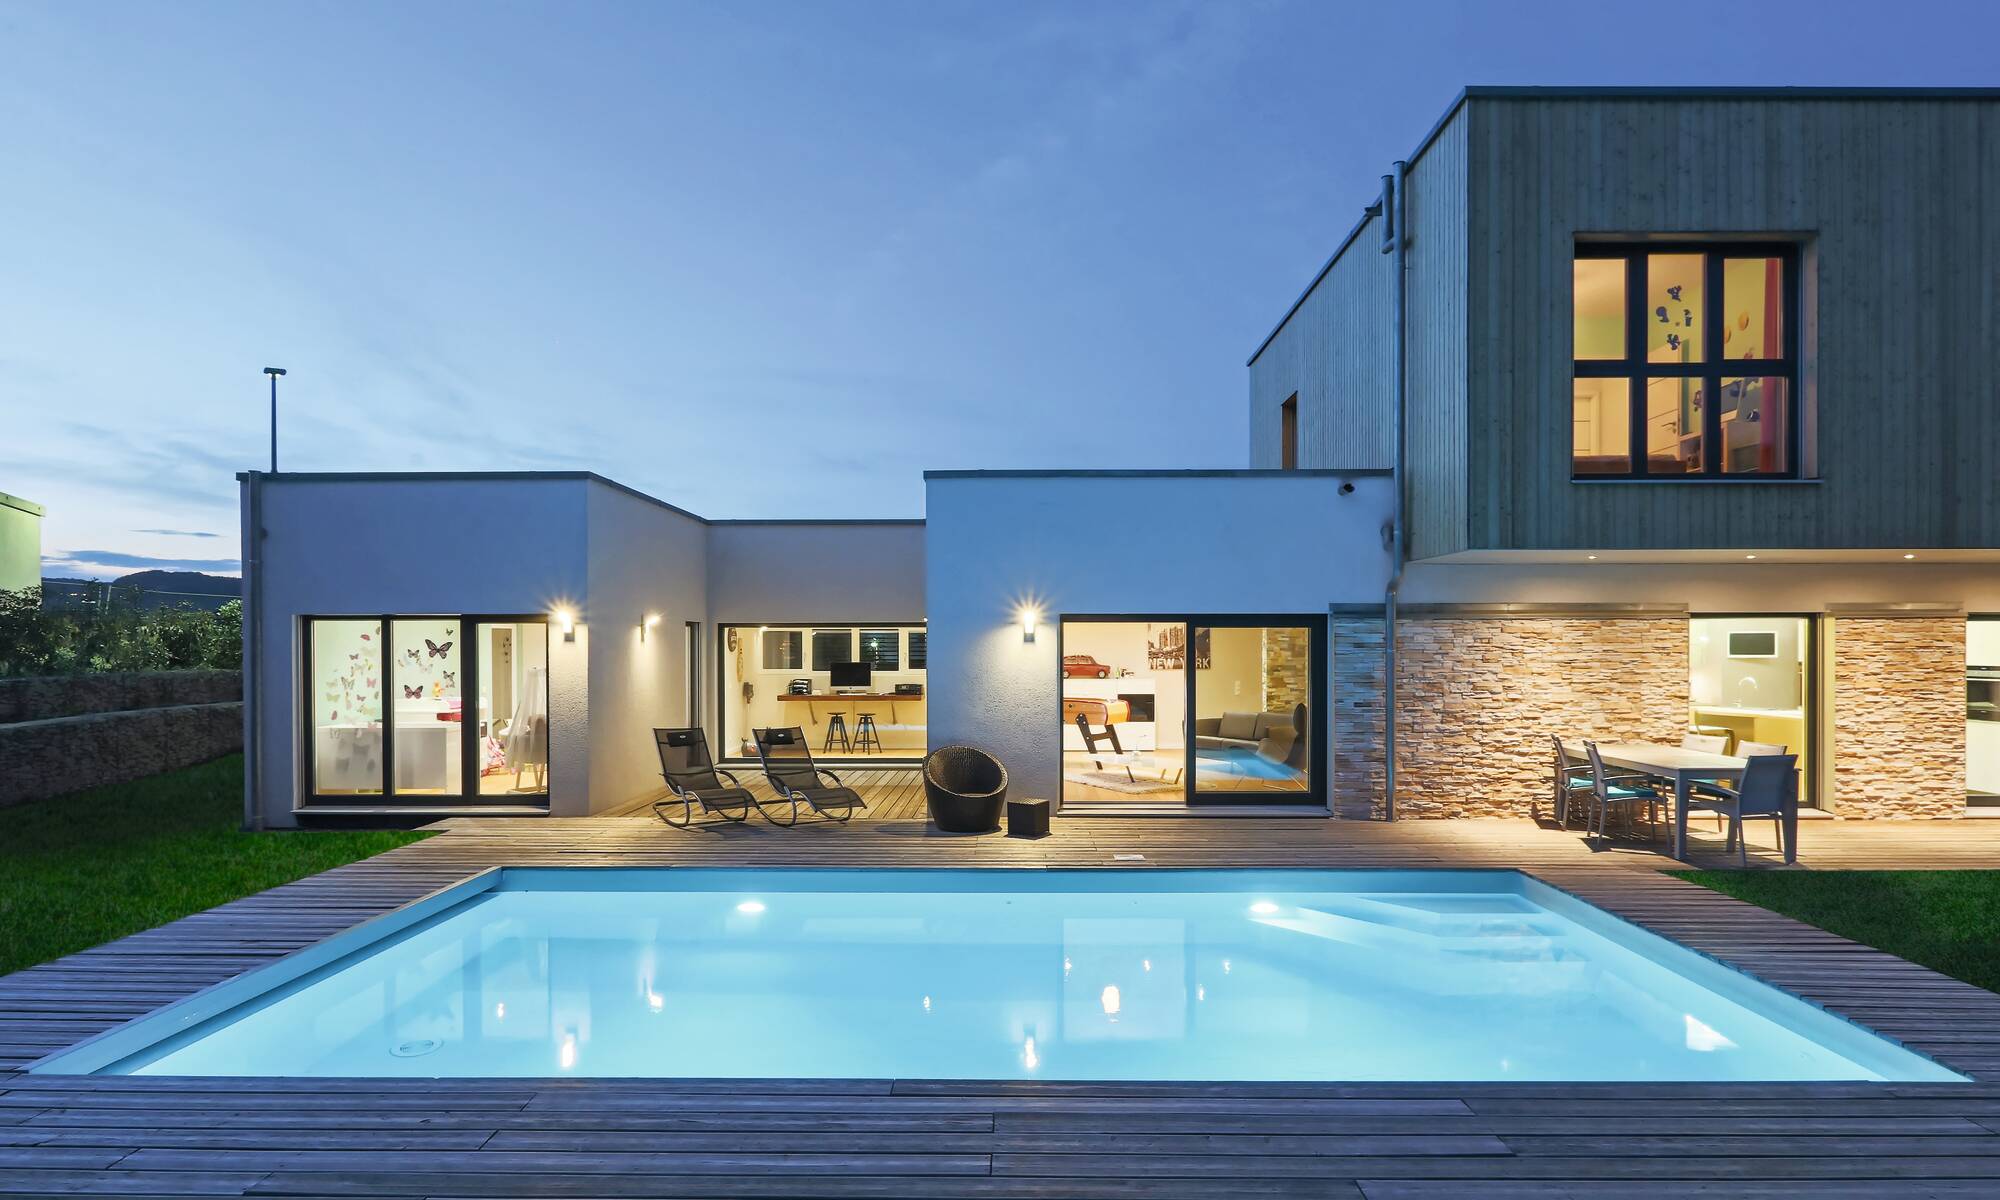 Architect-designed prefab home with large pool